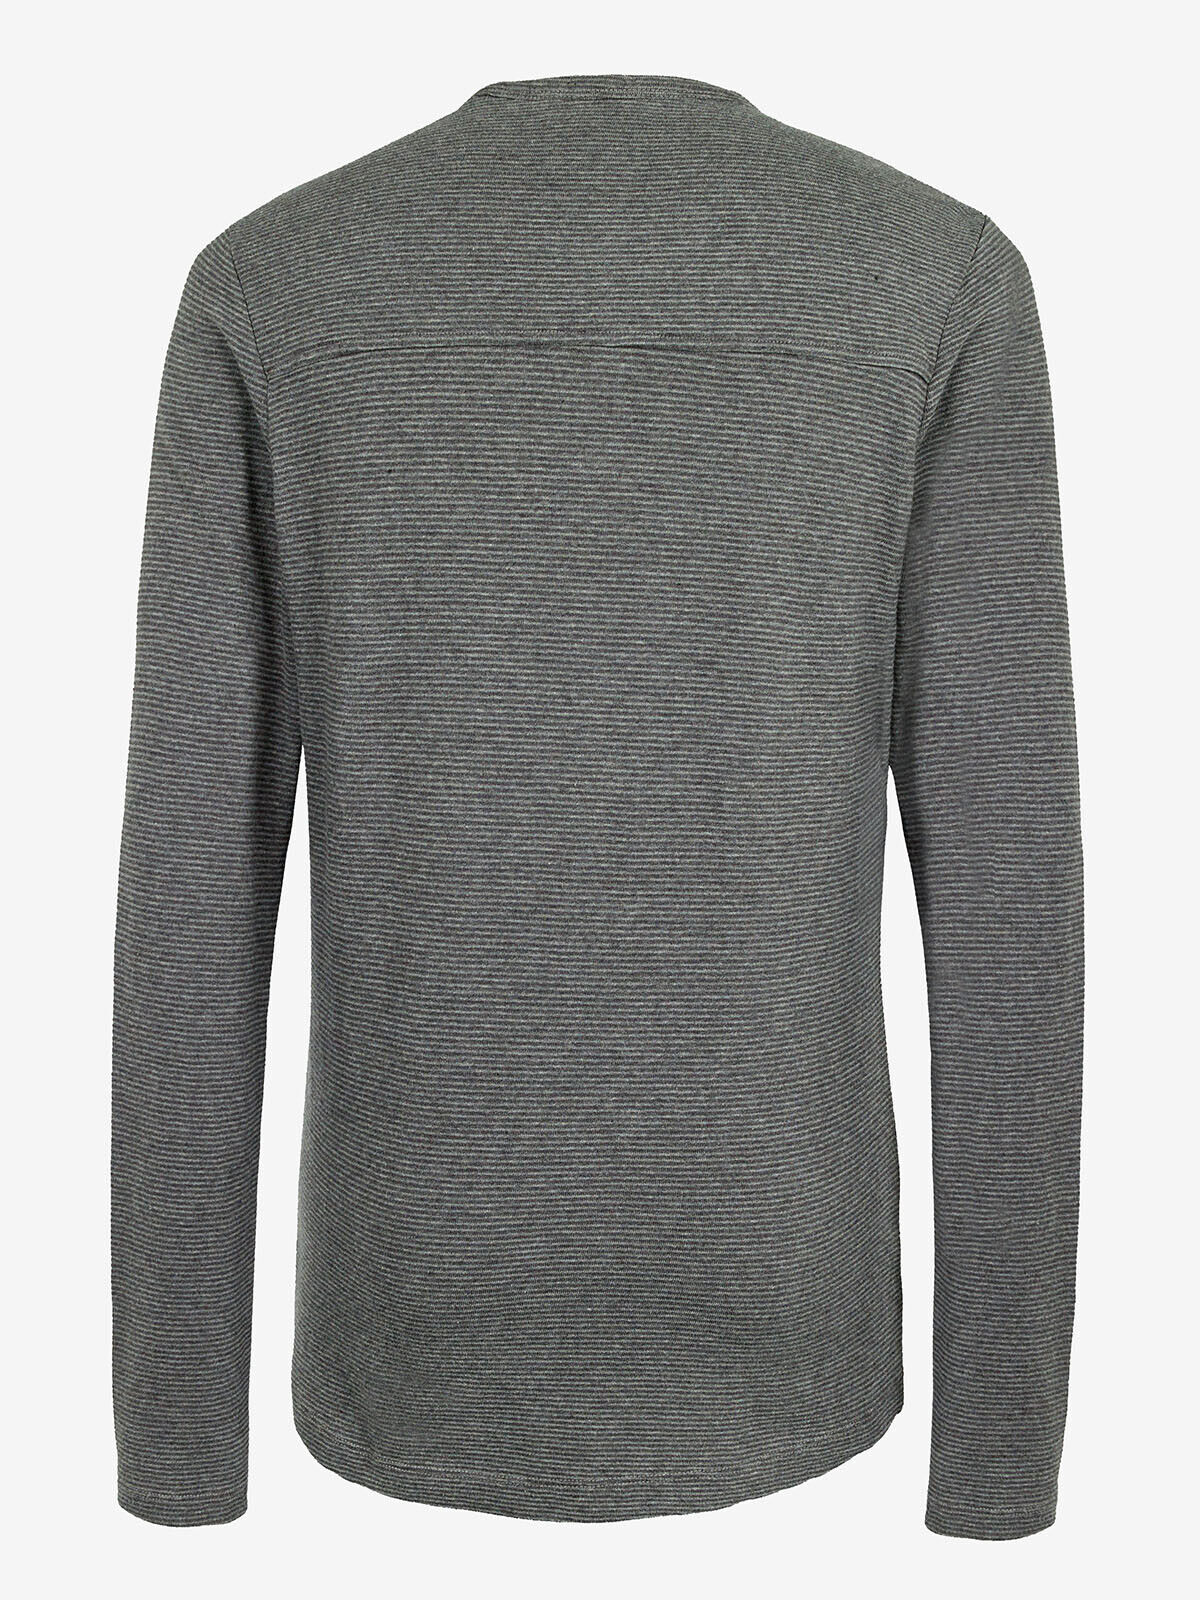 EX Fat Face Grey Marl Mens Pure Cotton Textured Henley Top Sizes S-XXL RRP £35